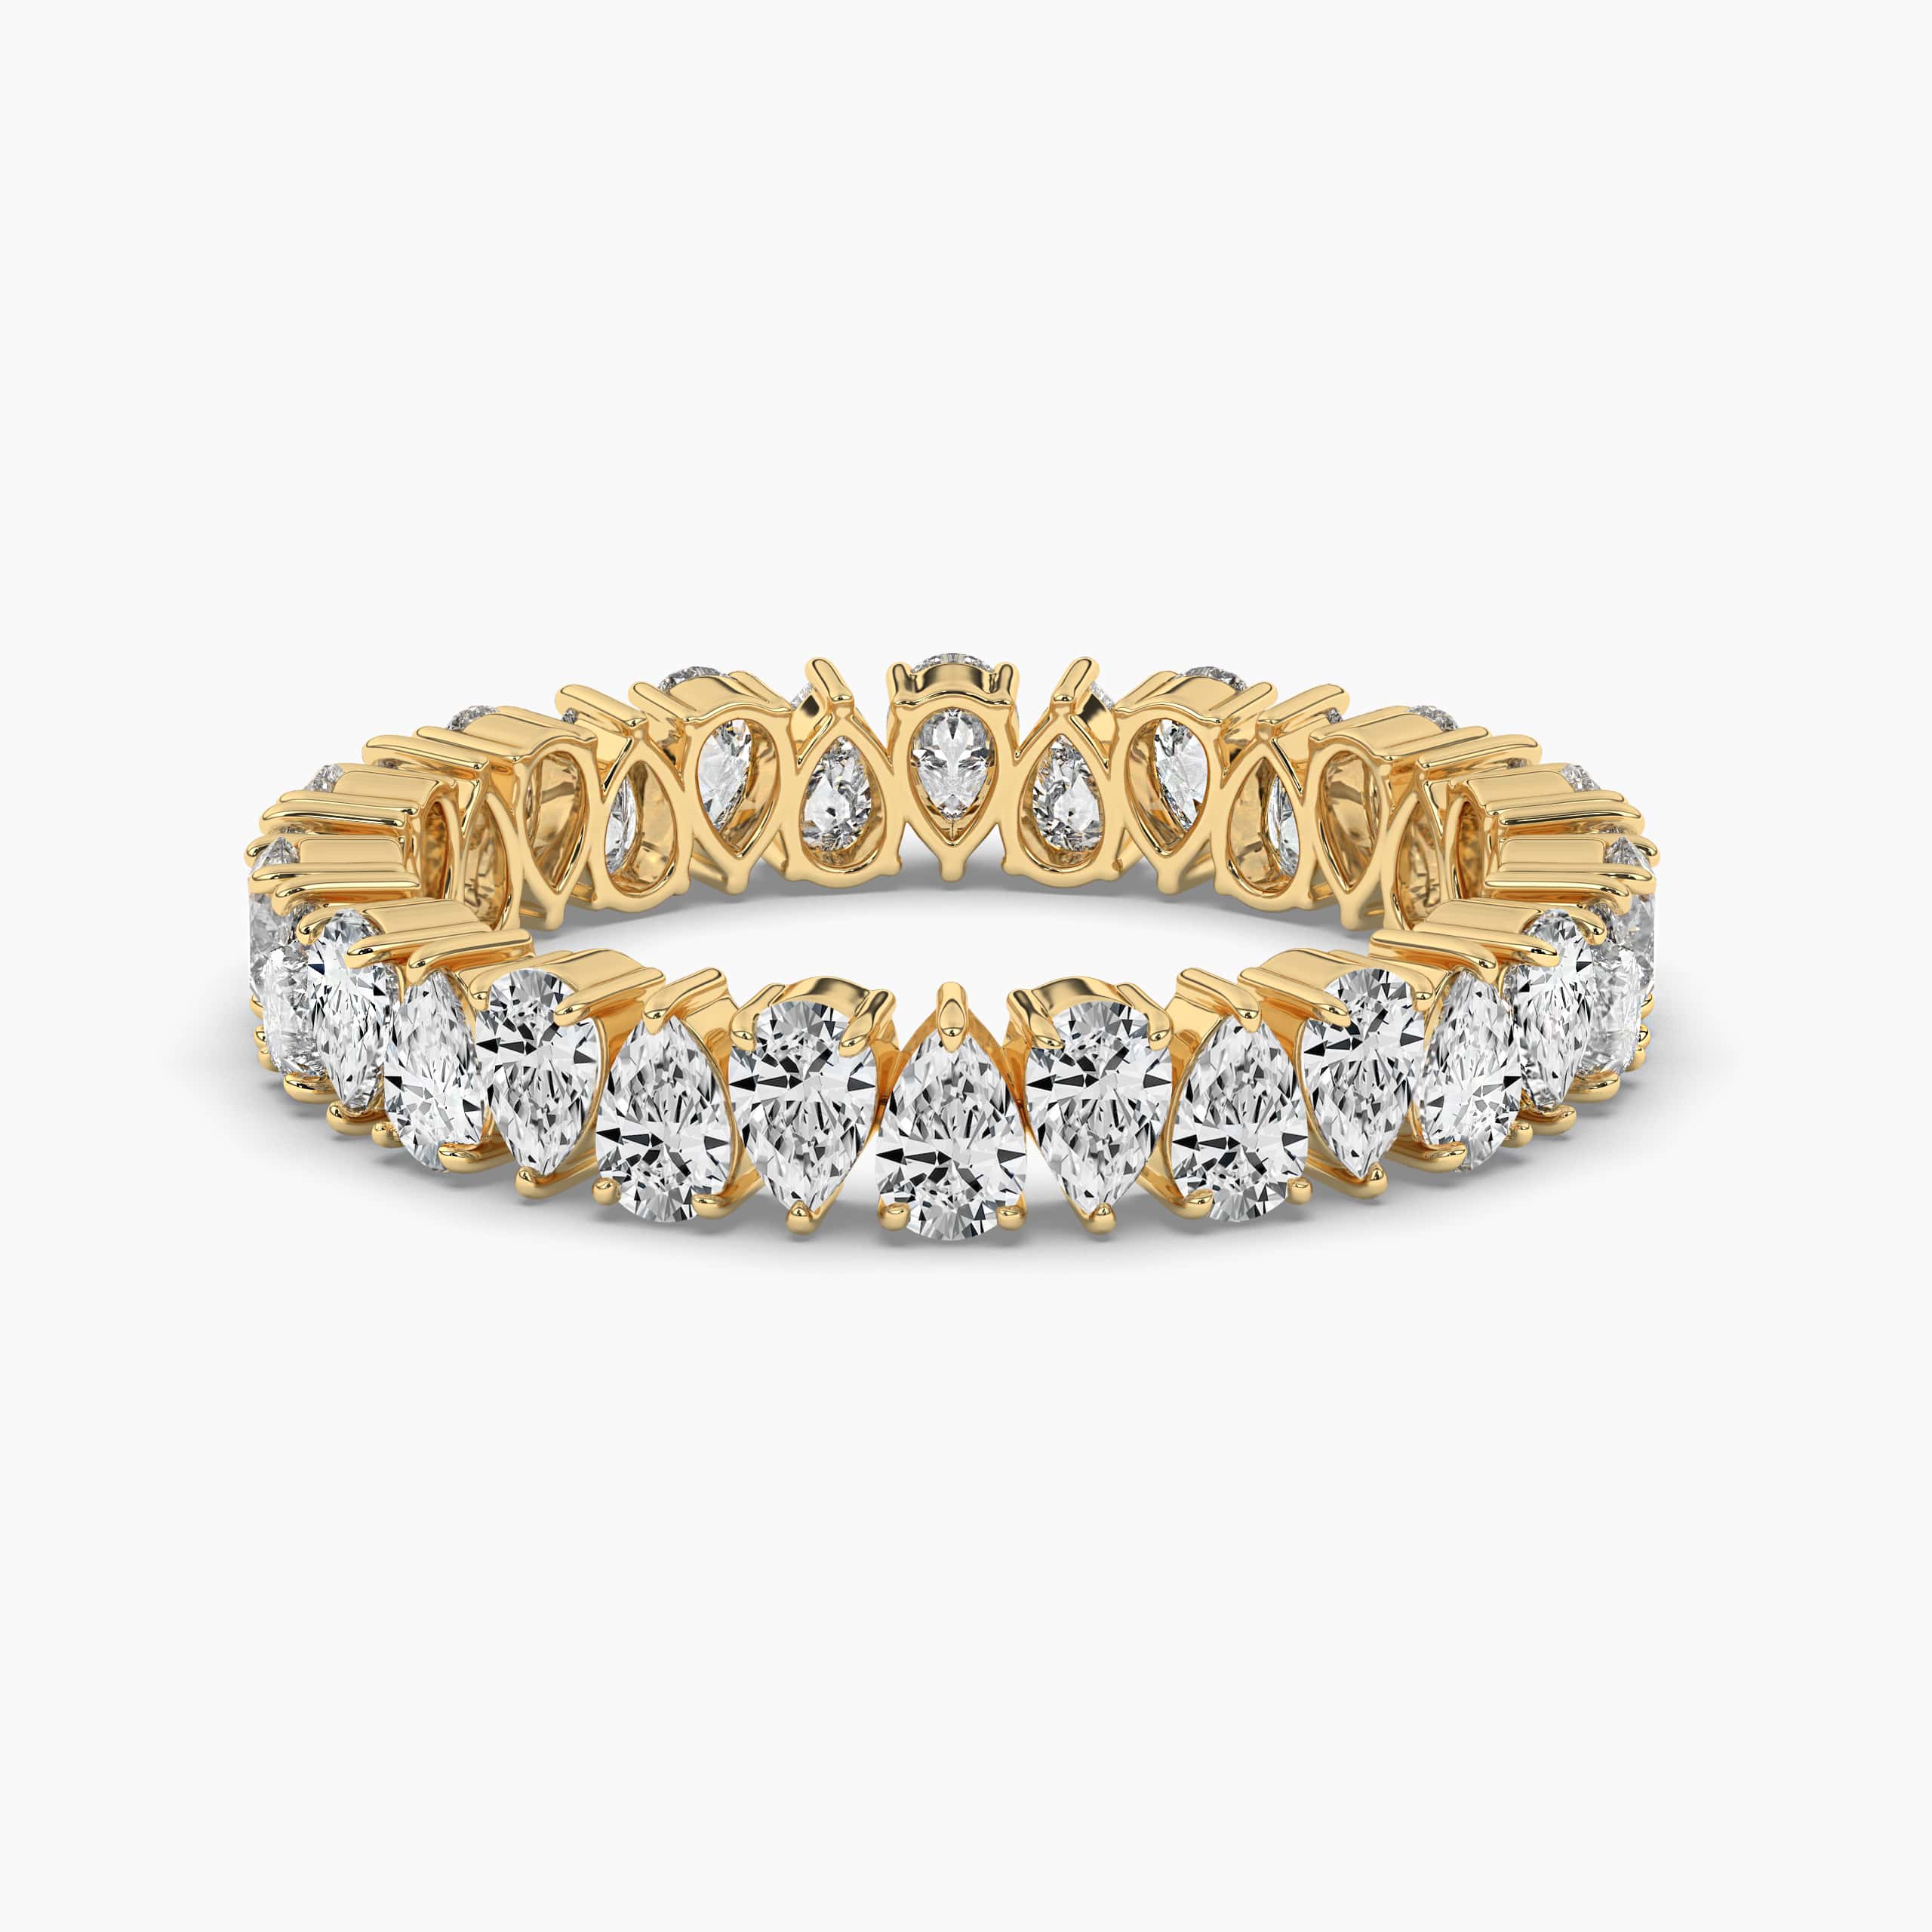 FLOATING MOISSANITE WEDDING BAND FOR WOMEN IN YELLOW GOLD